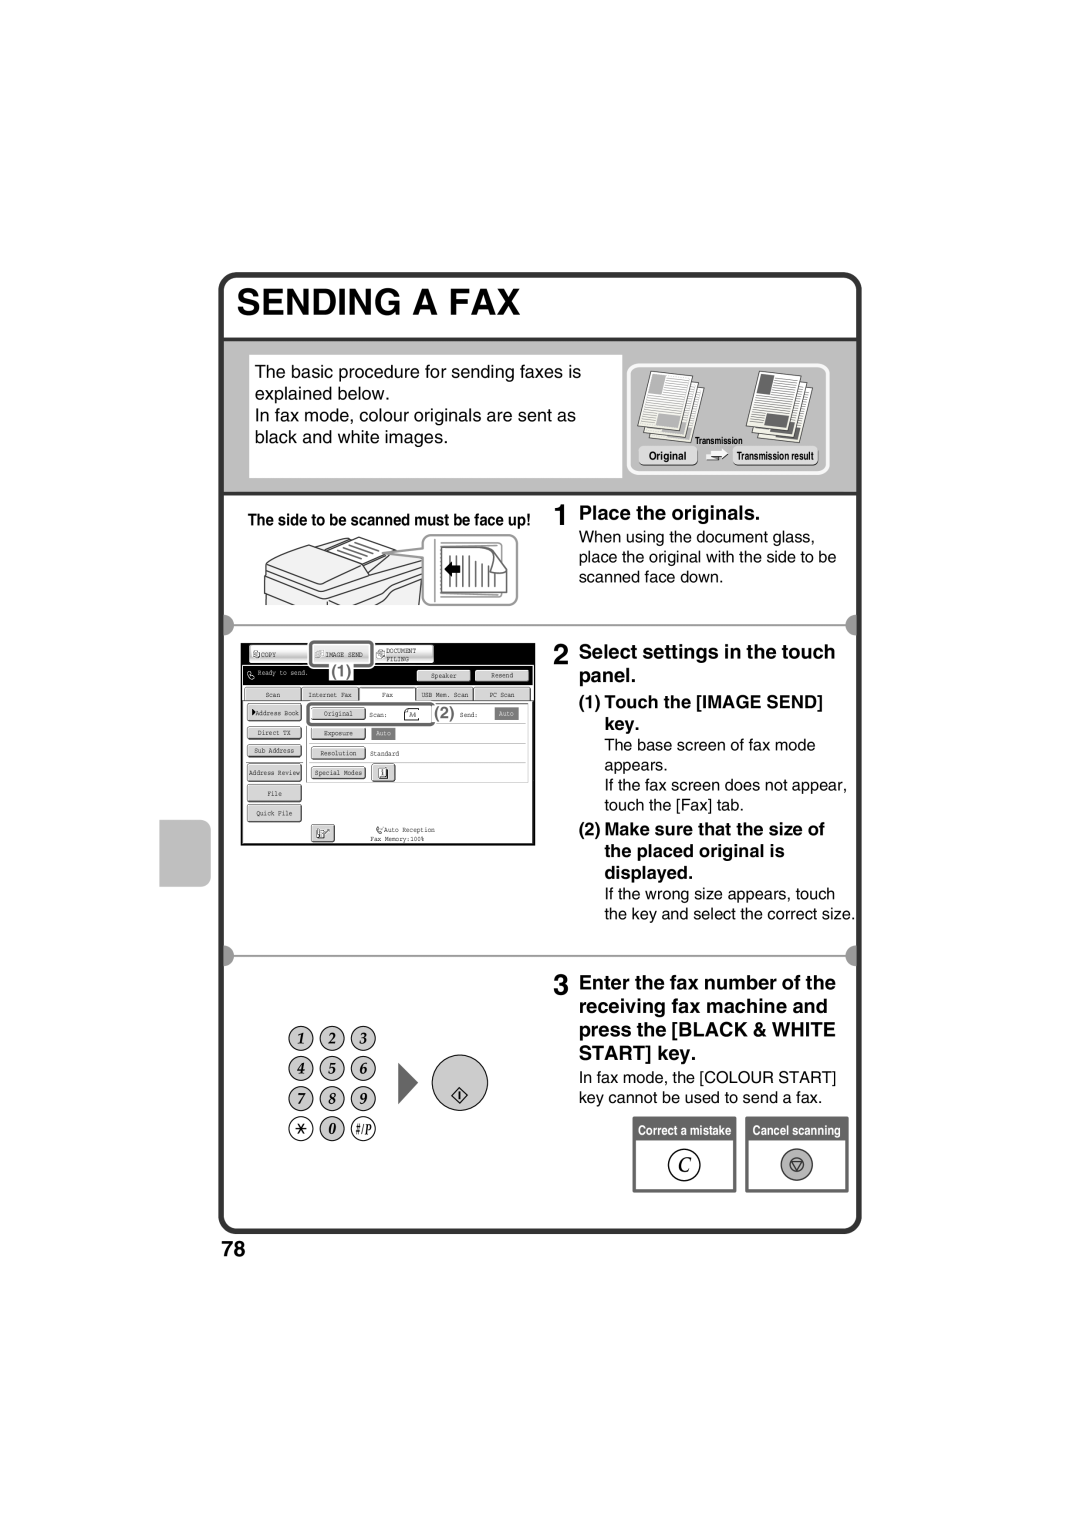 Sharp MX-C311 Sending A Fax, Touch the IMAGE SEND key, Make sure that the size of the placed original is displayed, Auto 